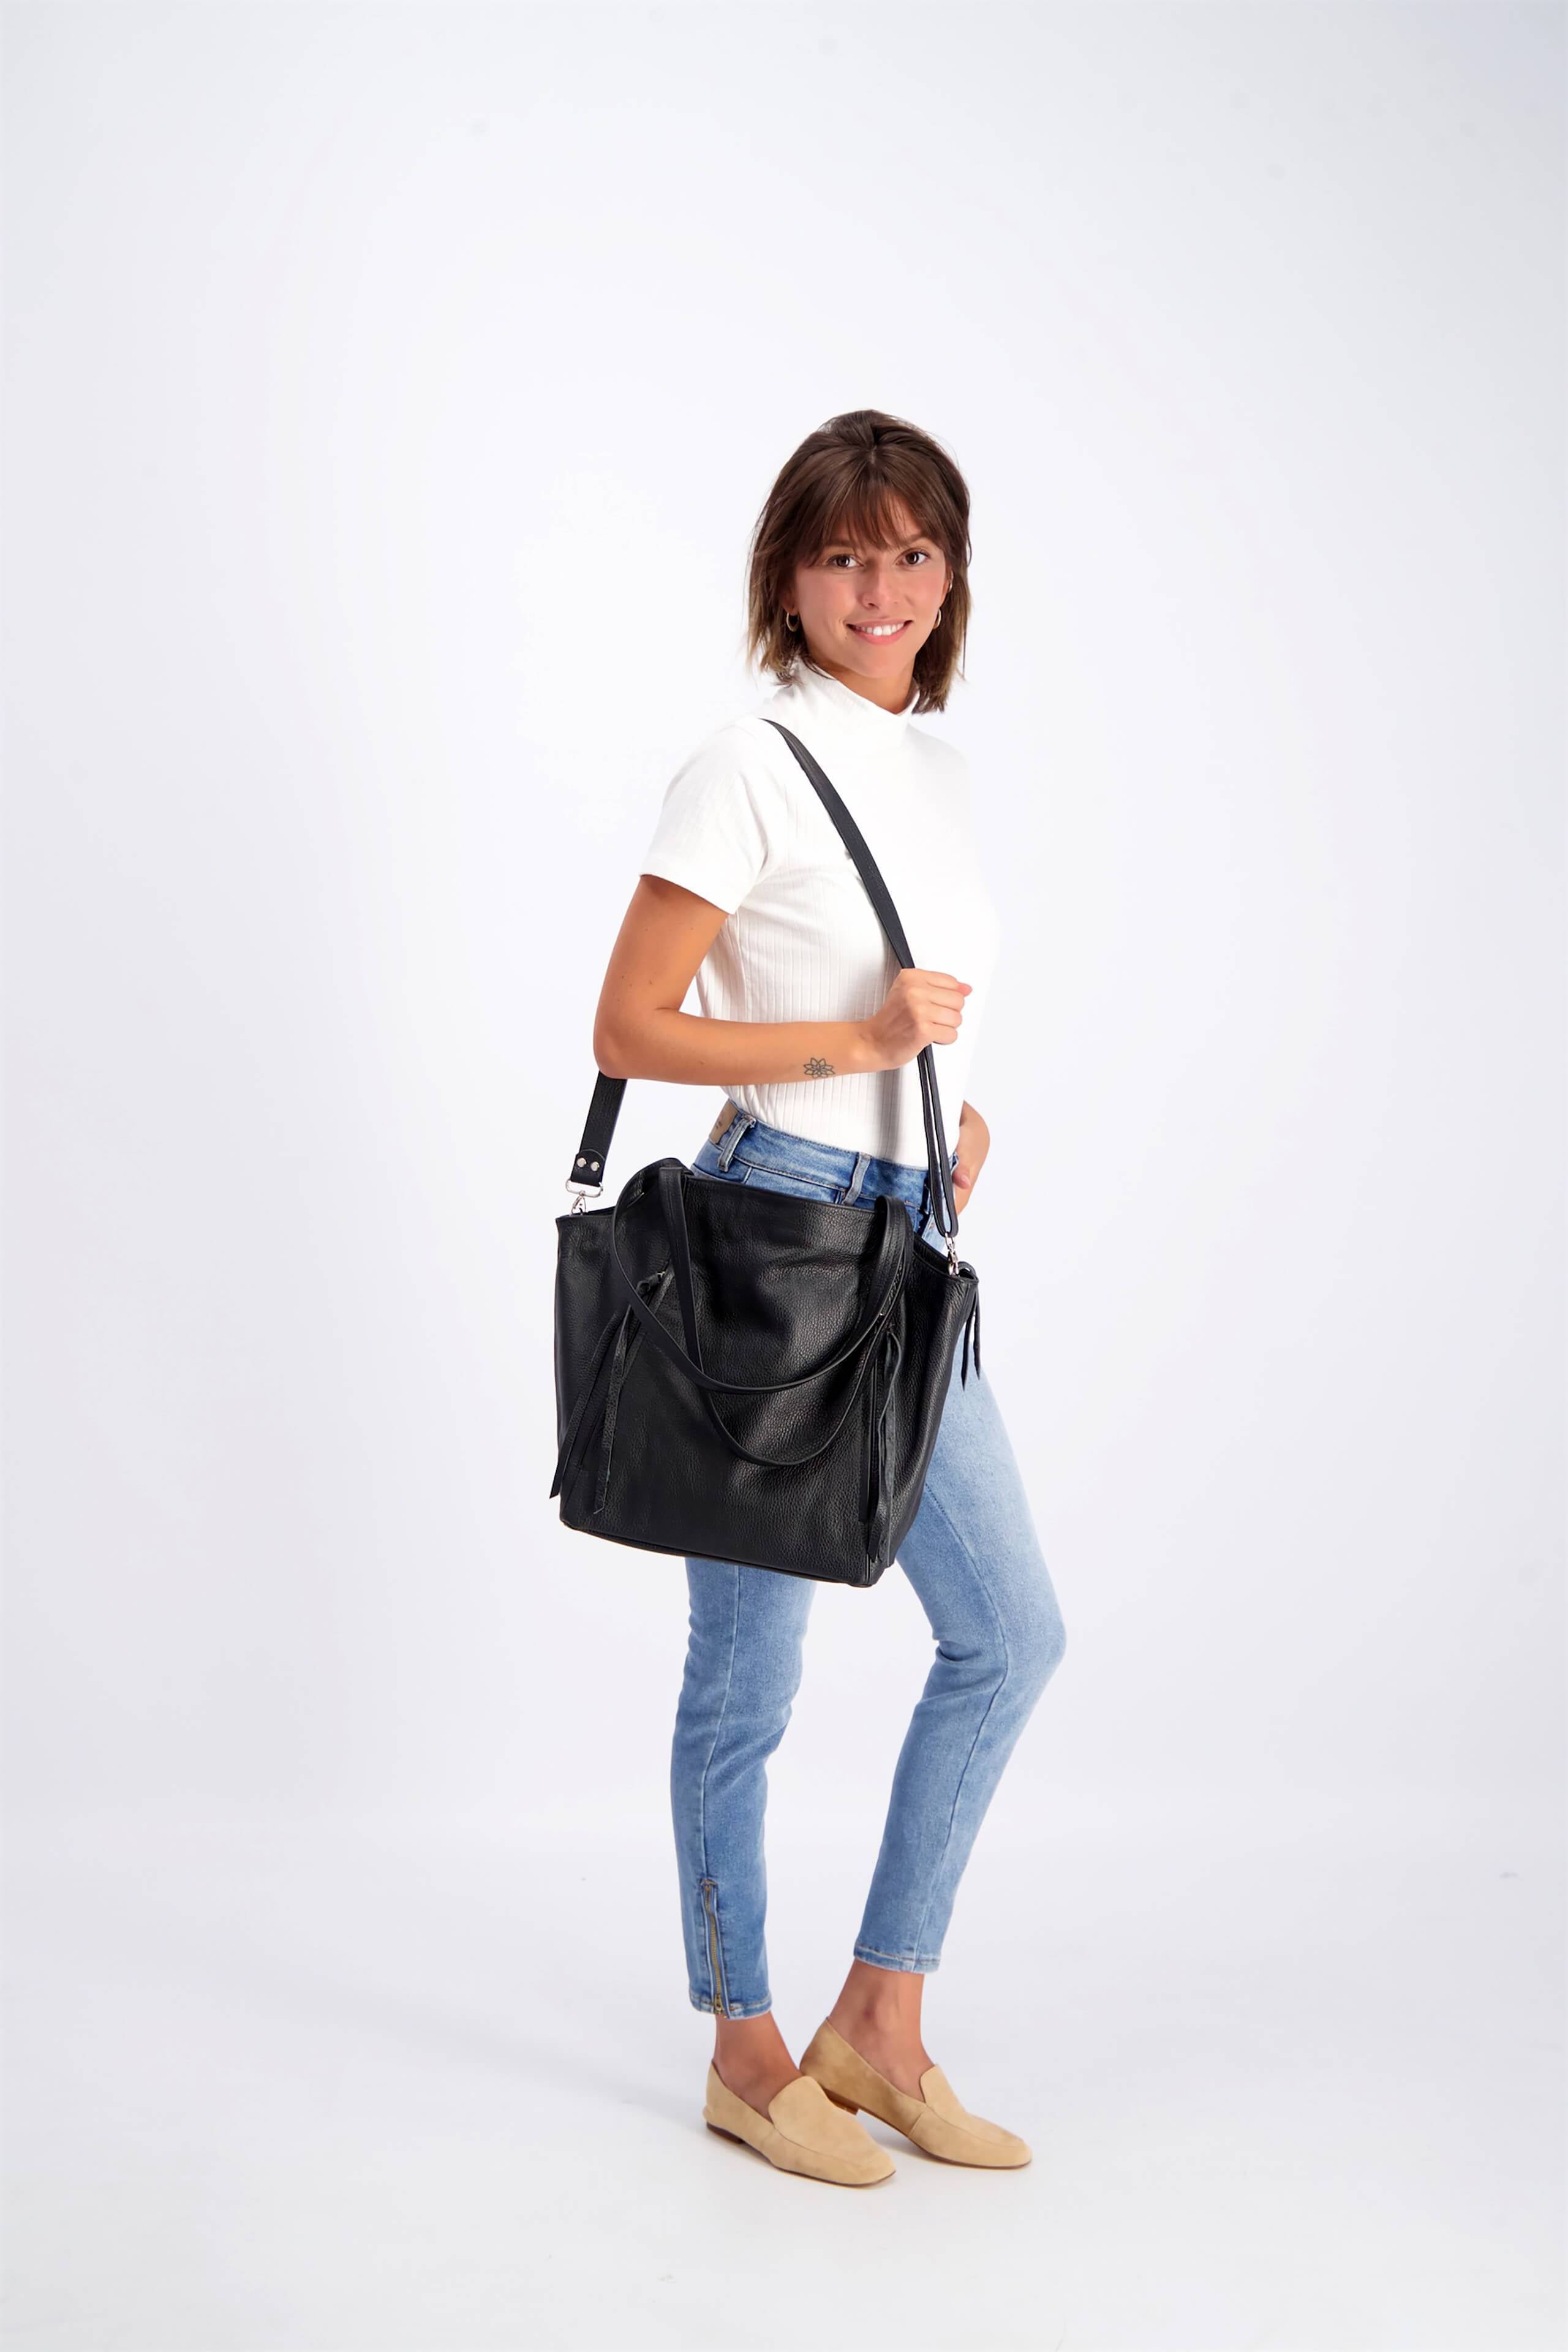 Handmade Large Crossbody Tote With Zipper For Women